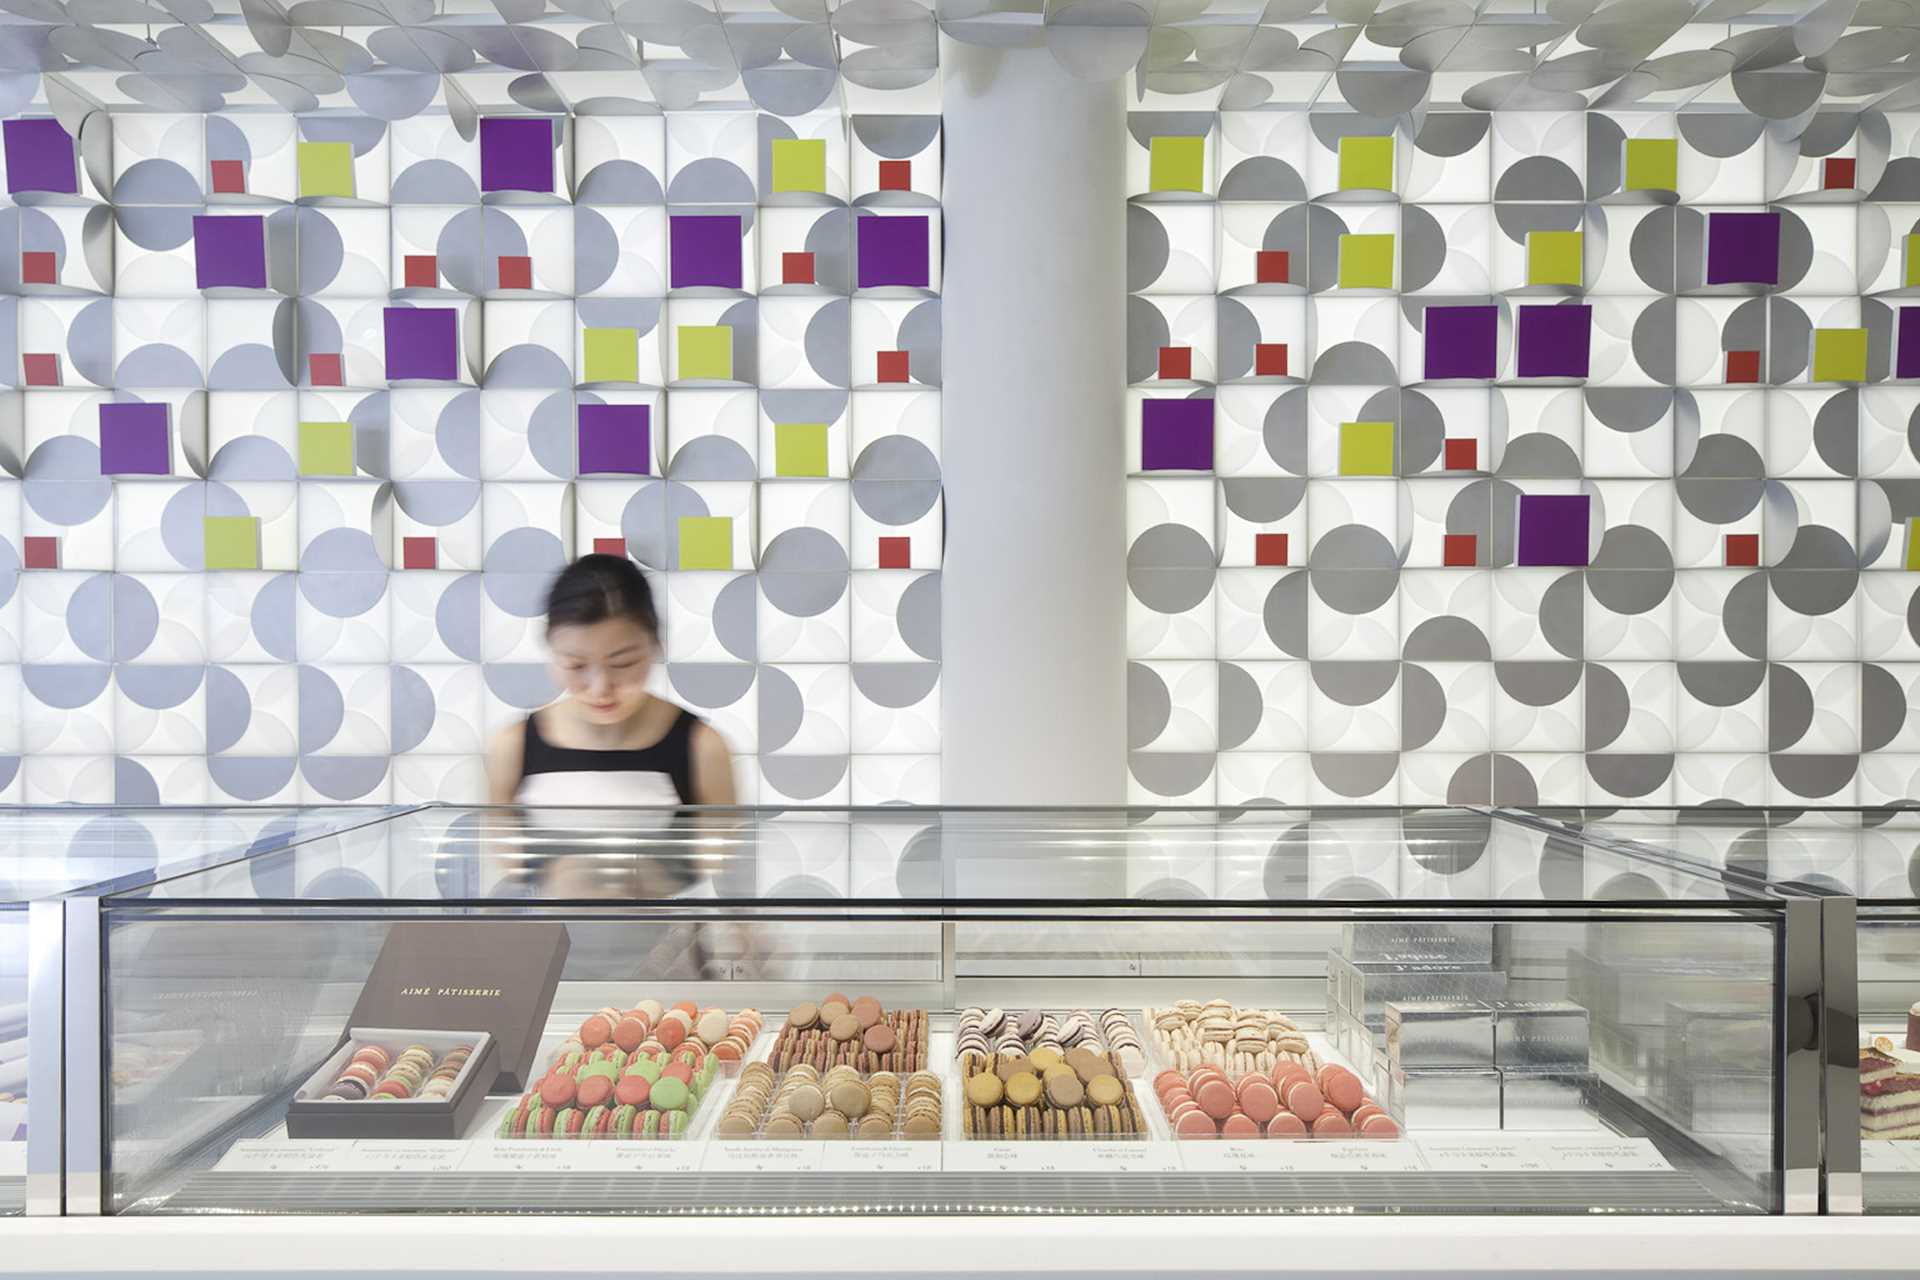 A modern patisserie whose design is inspired by the act of opening one of the gift boxes that holds their colorful macarons.